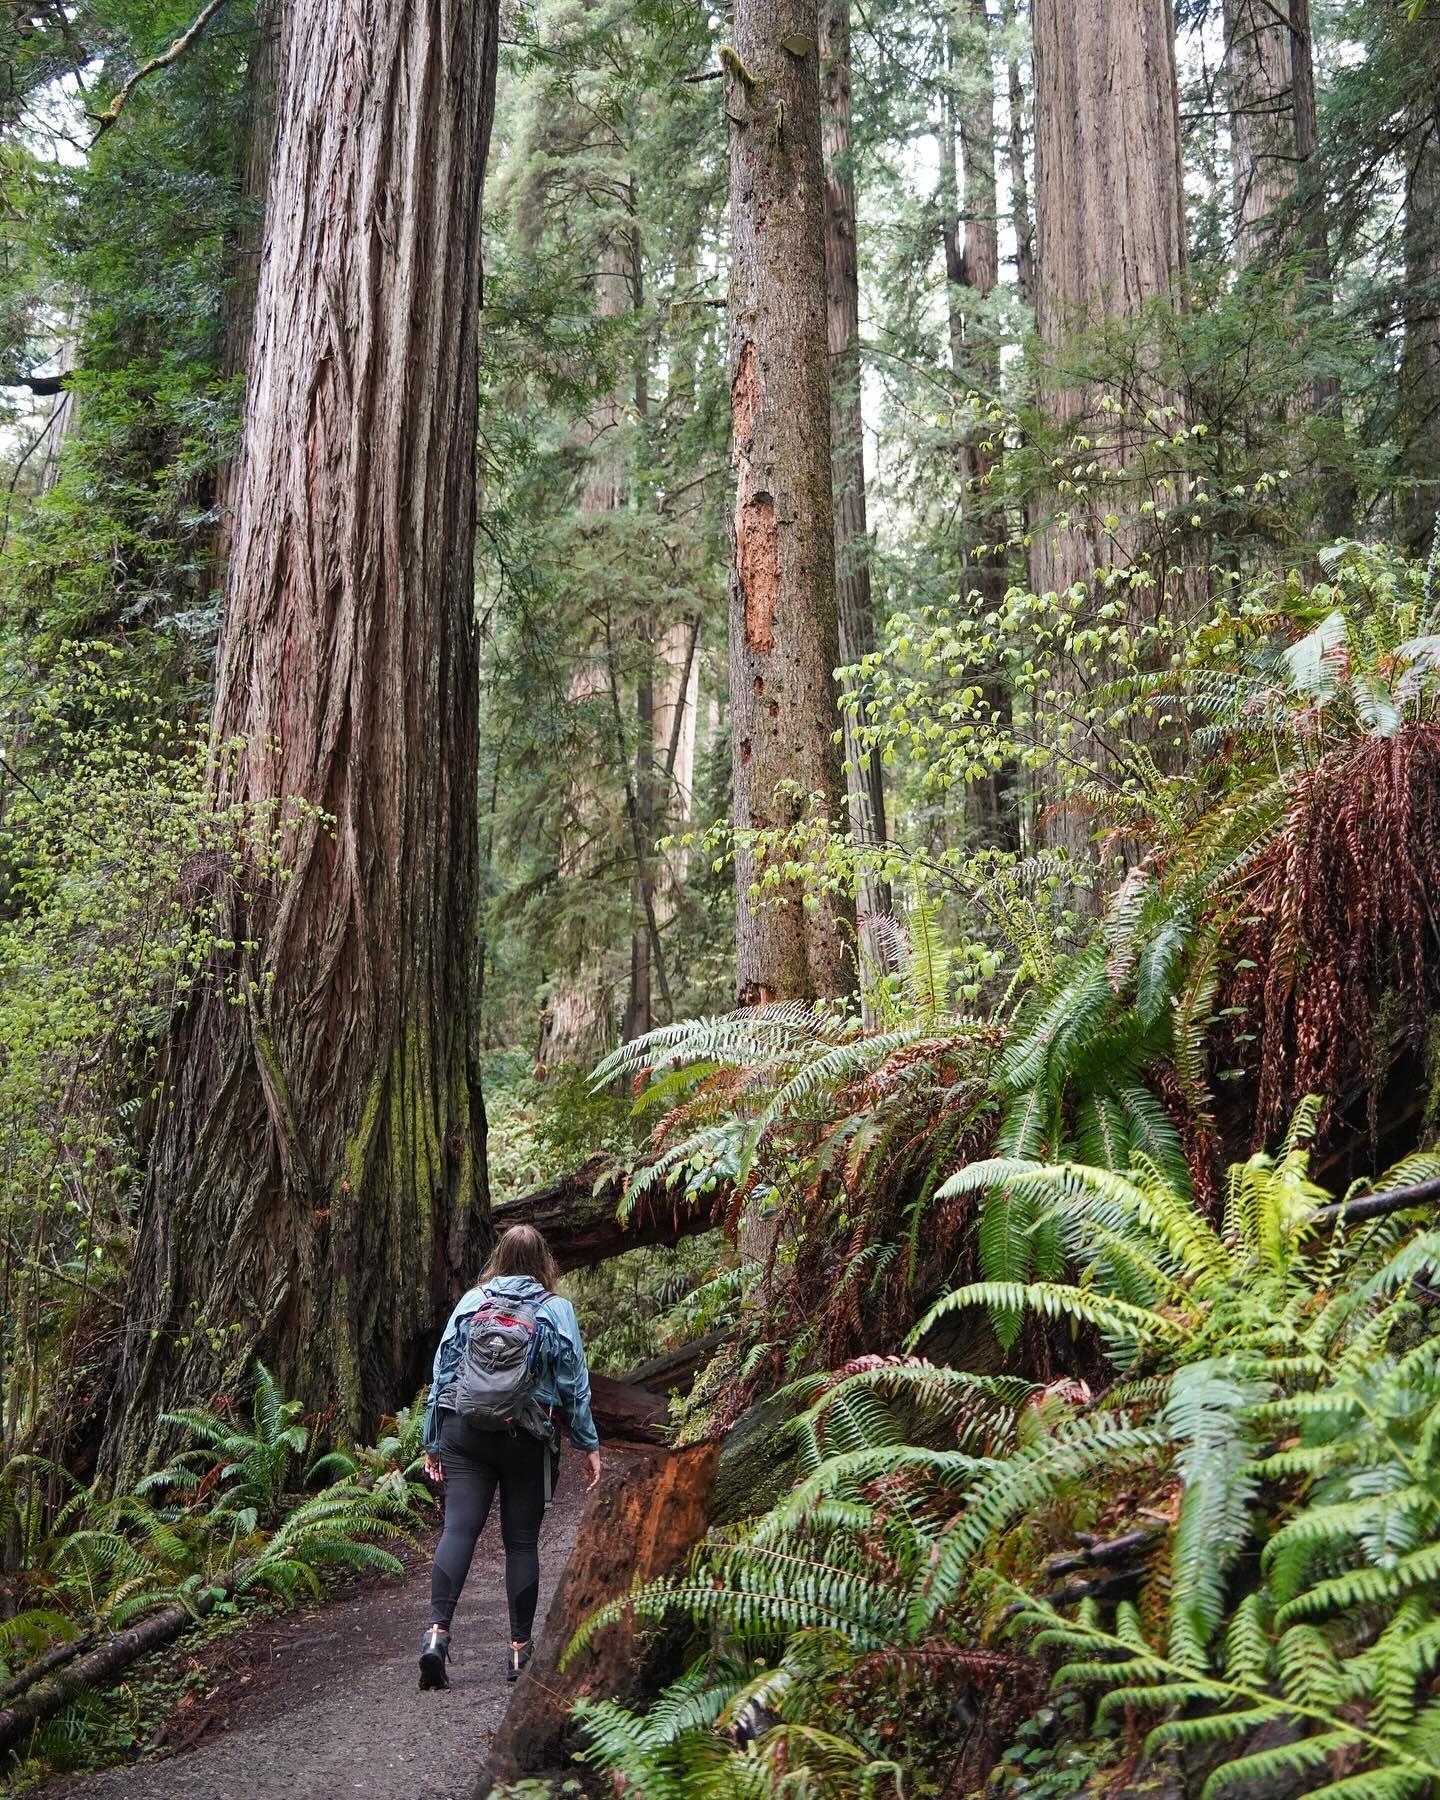 Have you been to Redwoods National and State Parks?